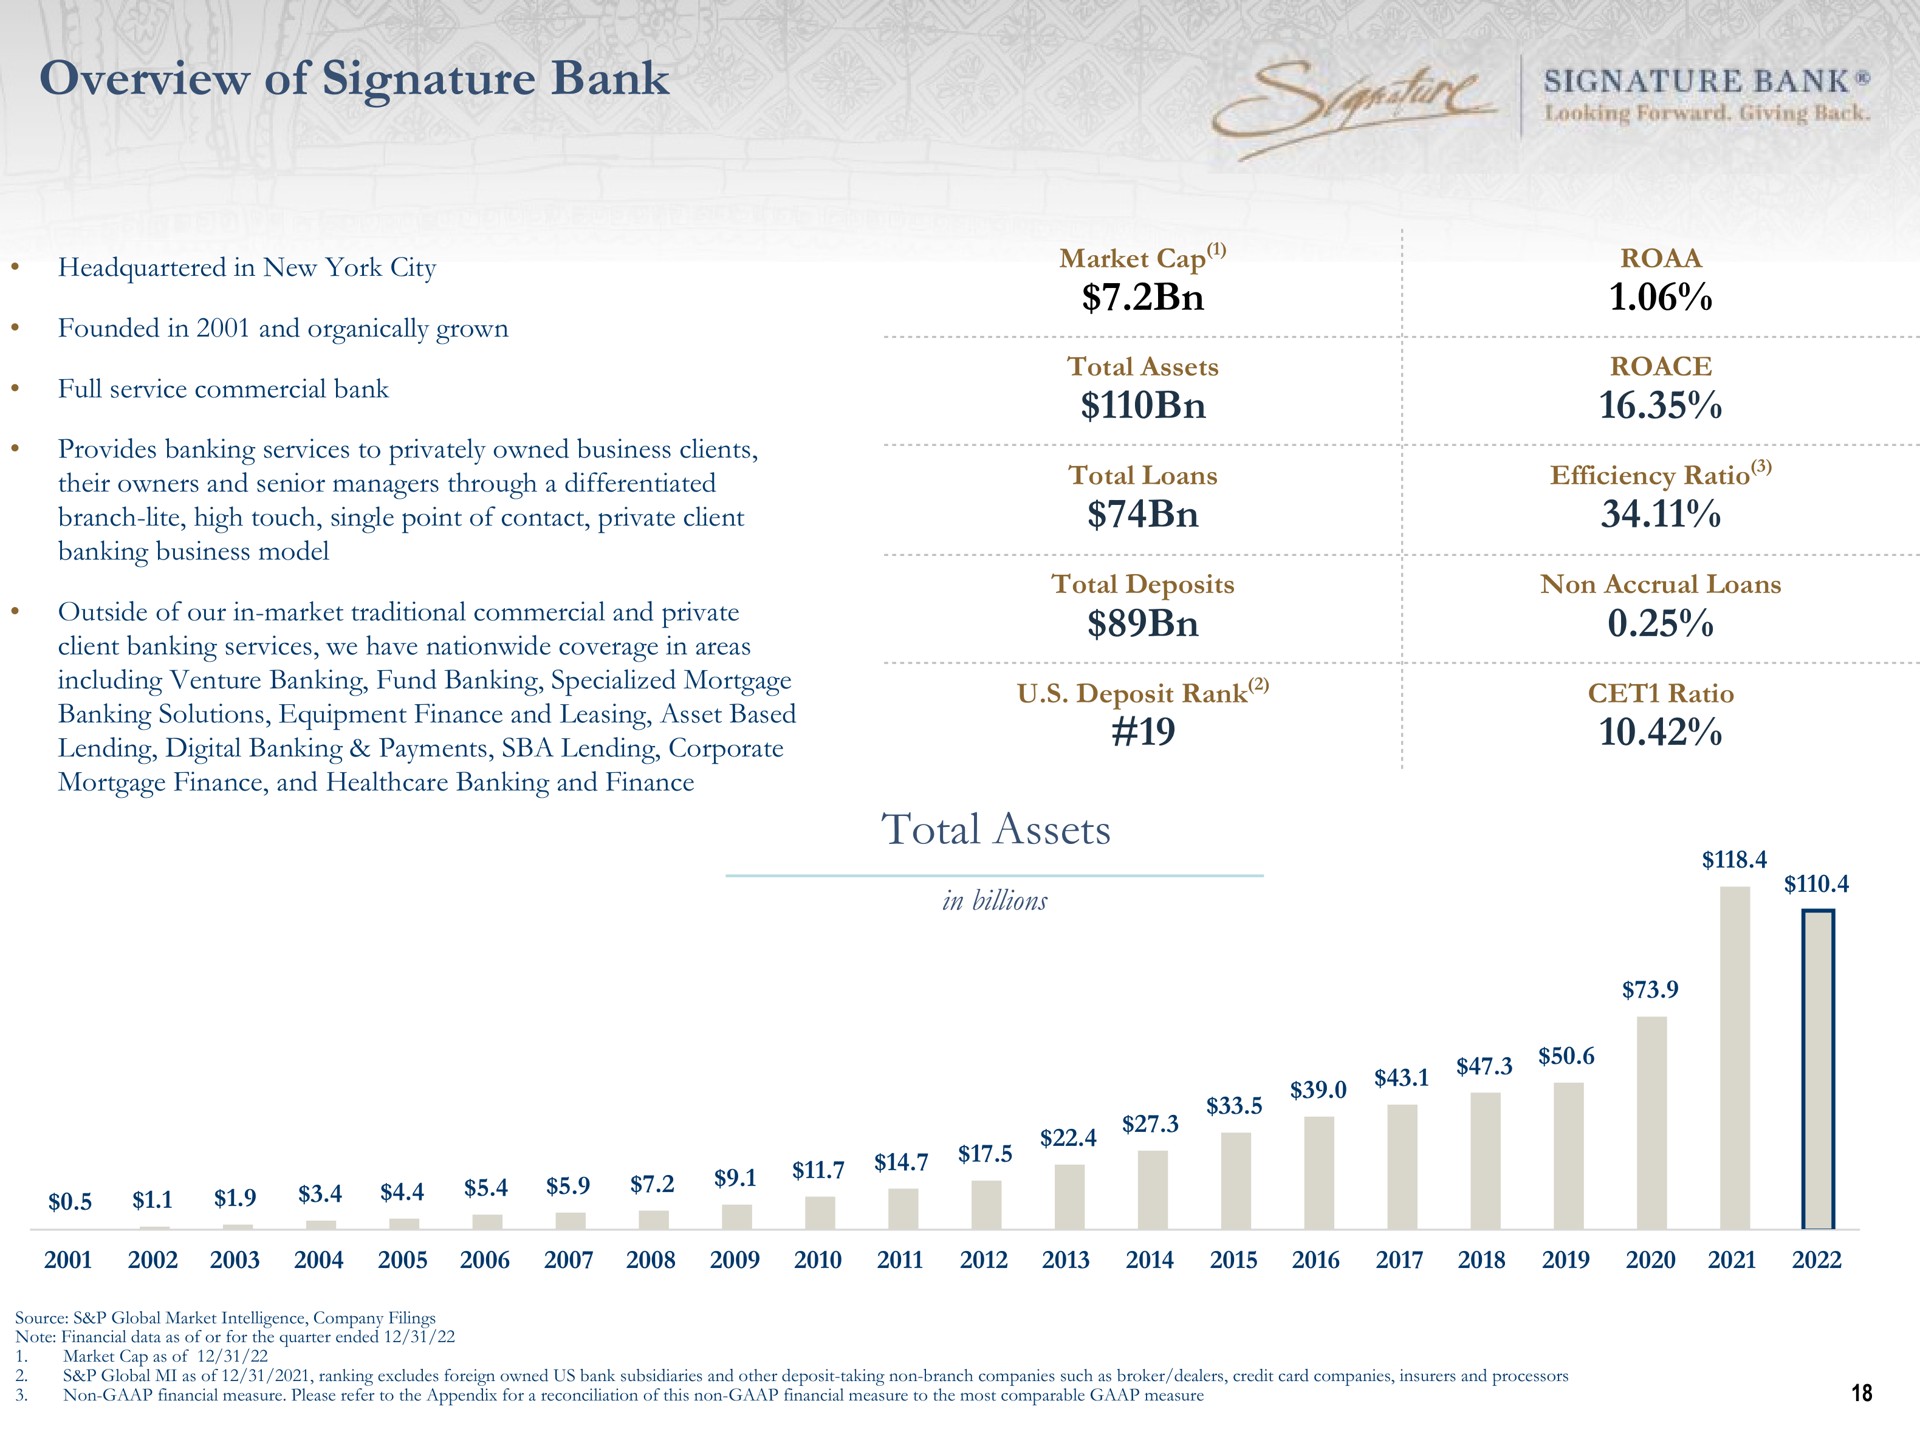 overview of signature bank total assets ore | Signature Bank